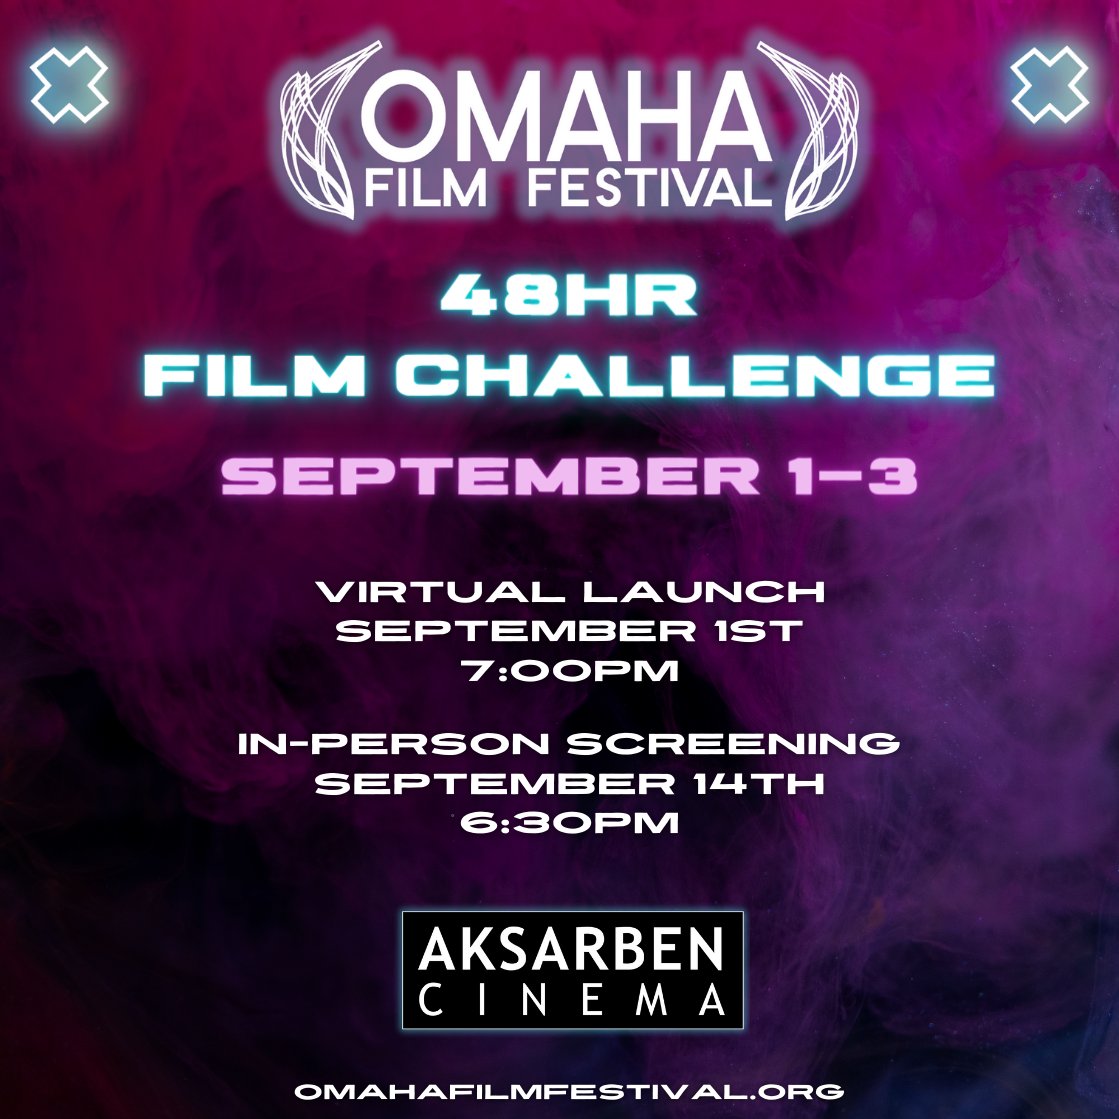 Ladies and Gentlemen, start your cameras! The Omaha Film Festival is hosting a 48 Hour Film Challenge to spark creativity and collaboration among local creatives. See our Facebook page for official rules and registration link!